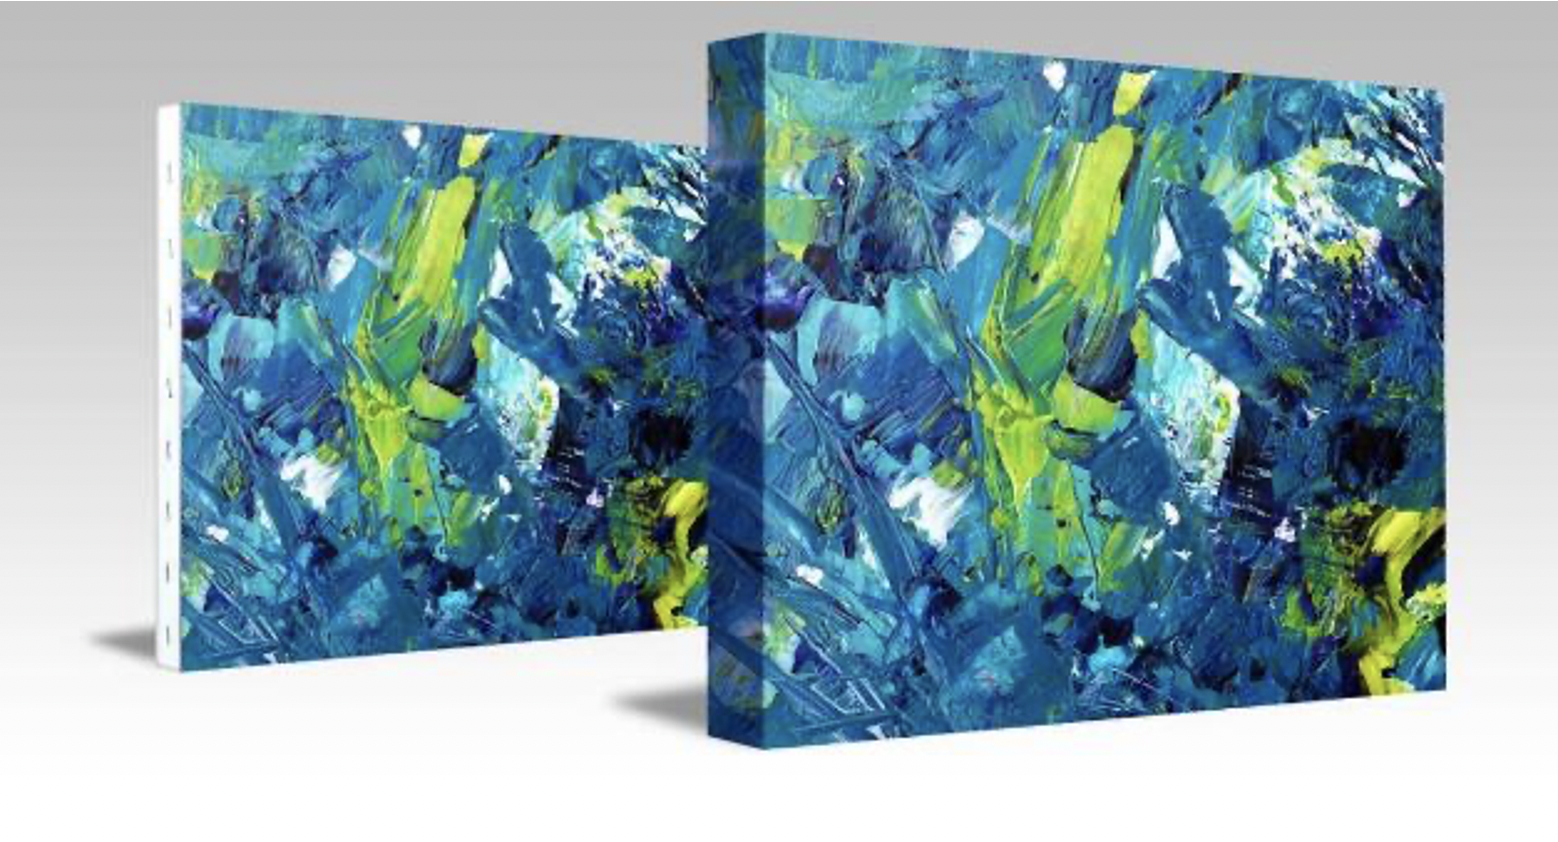 gallery wrap vs traditional wrap on canvases